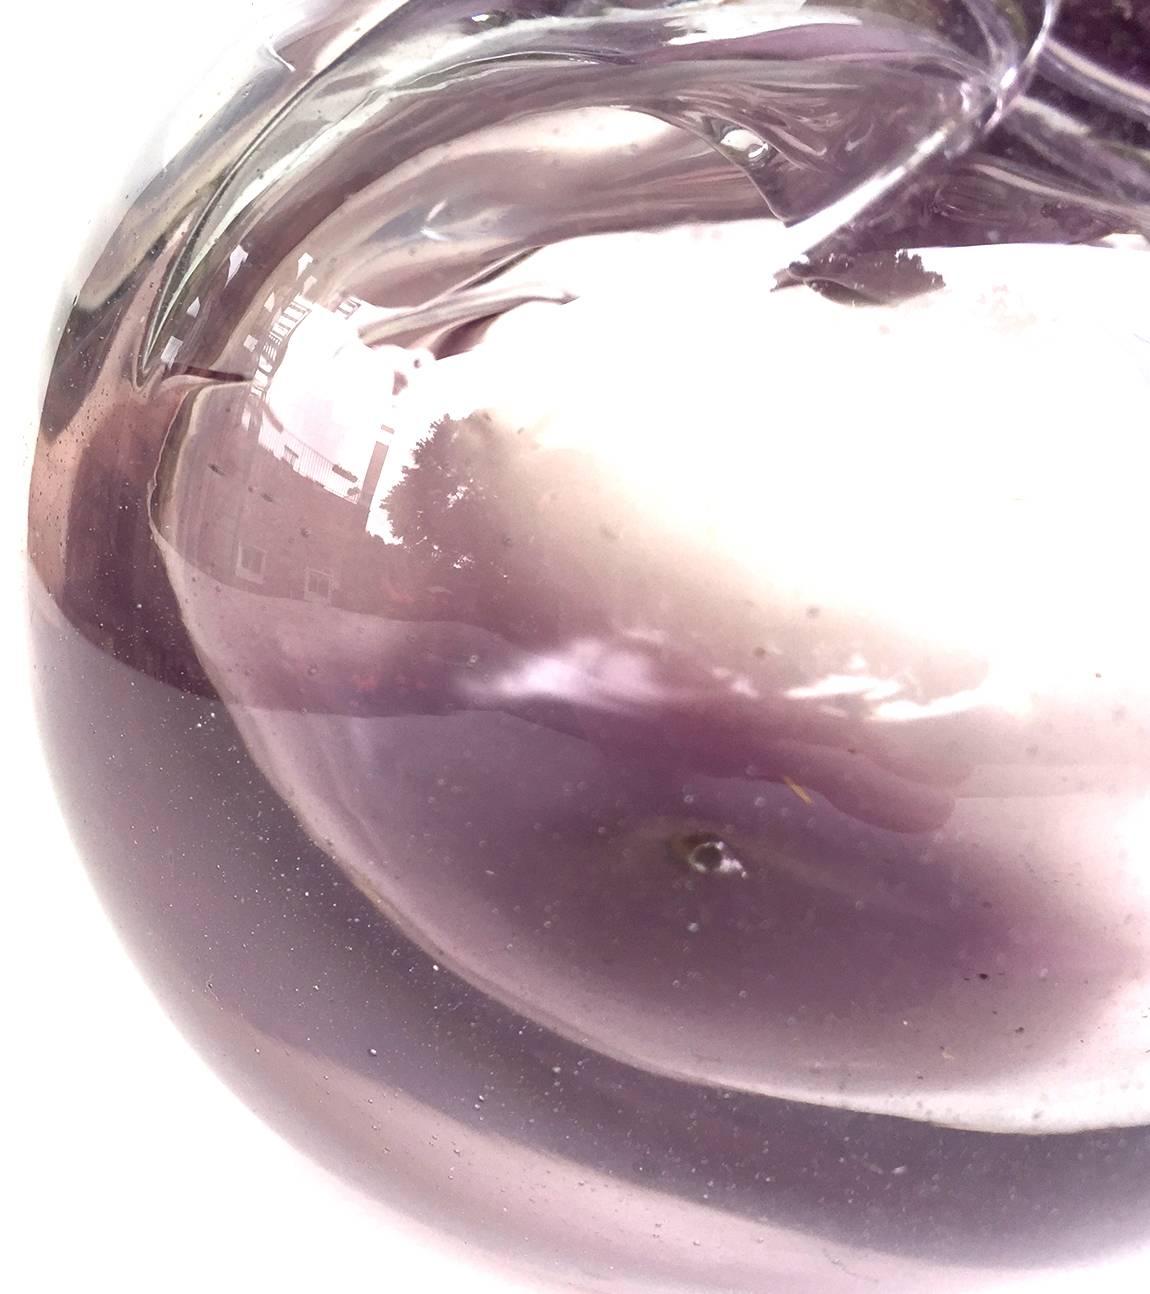 Stauffer Studio art glass free vase, signed by artist and maker Richard L. Stauffer. The globular vase with center hole, the amethyst color stretched and played with to the interior of the form. This type of experimental material is parallel to